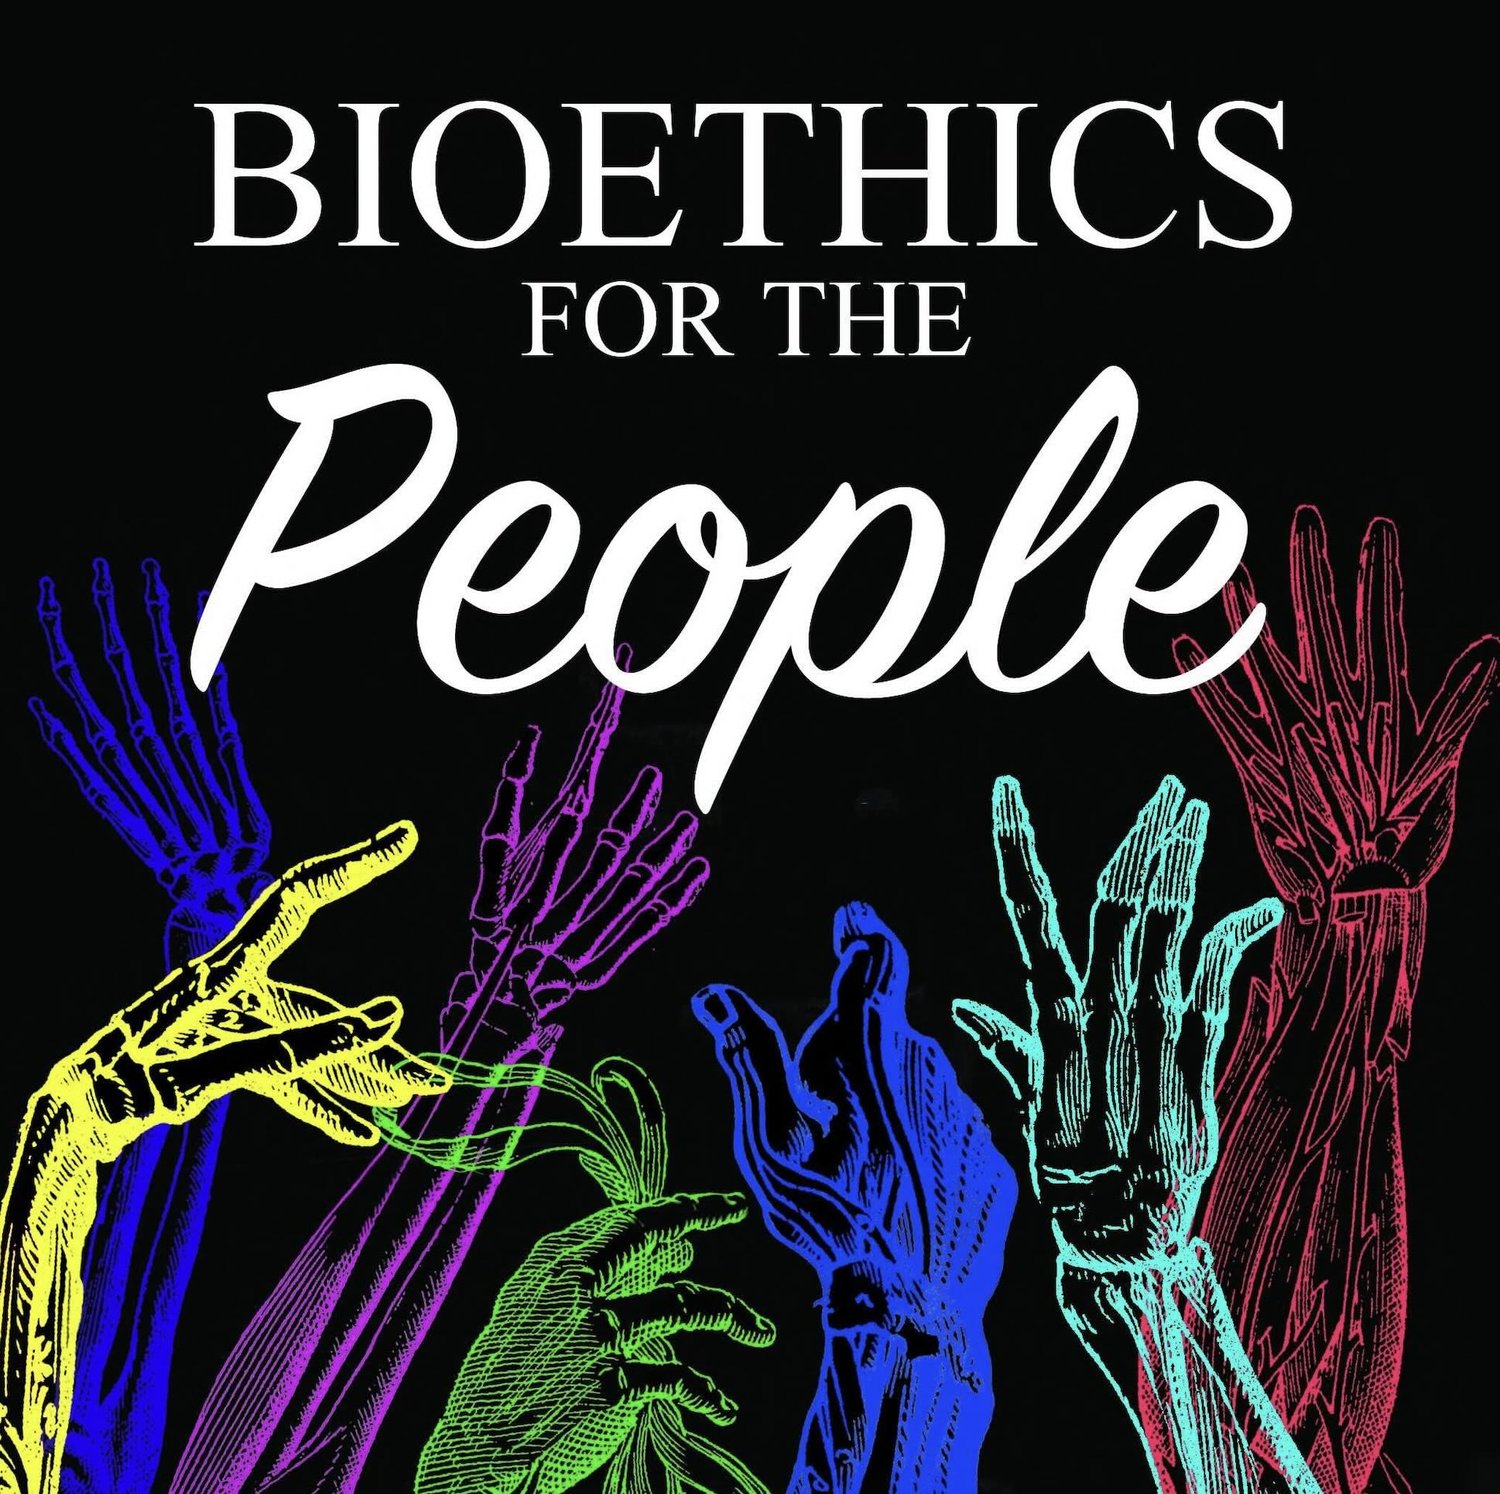 BIOETHICS FOR THE PEOPLE